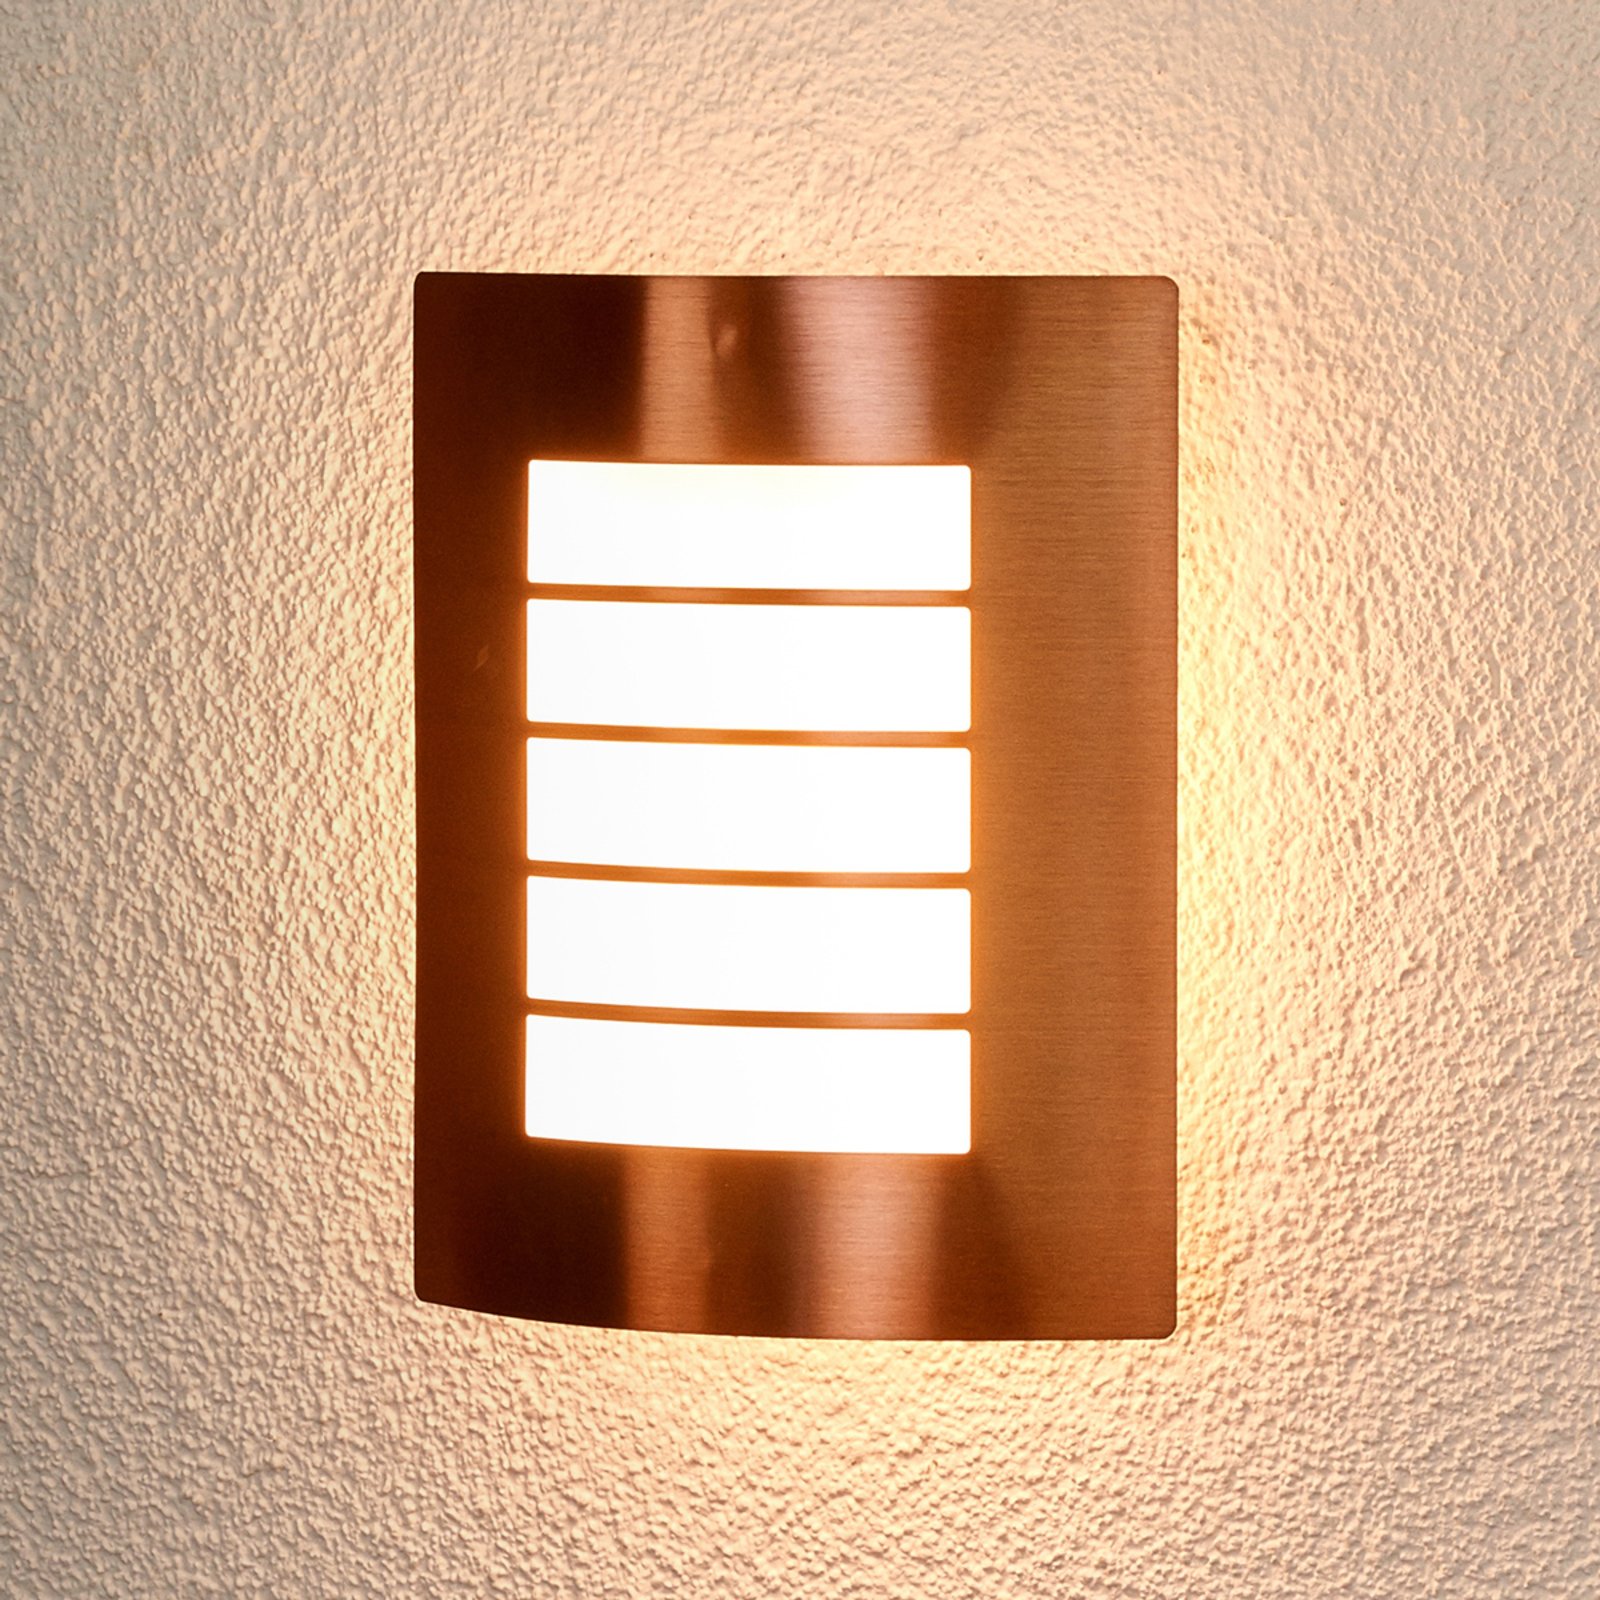 Copper-coloured outdoor wall lamp Blanka